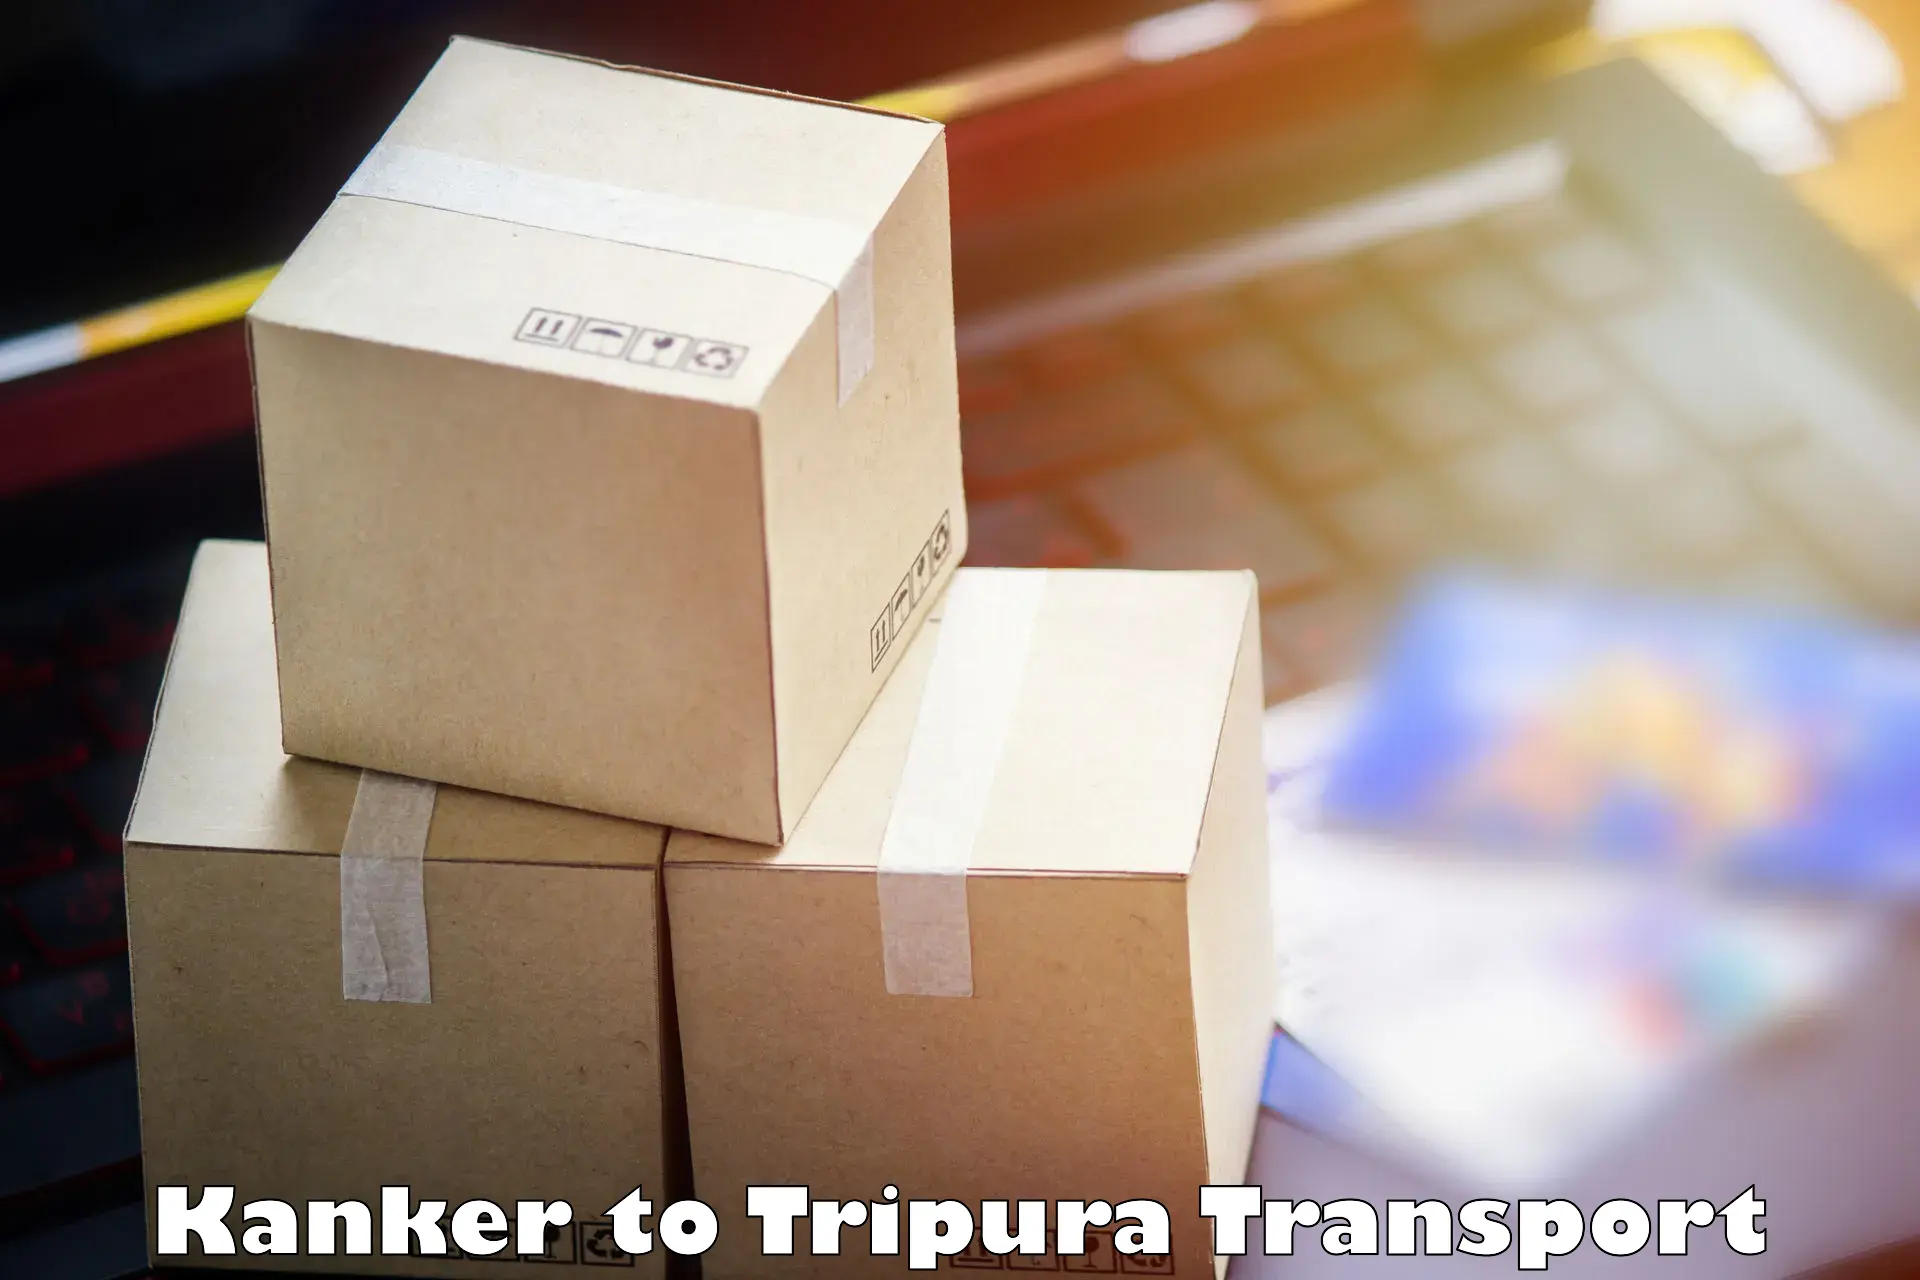 Nearby transport service Kanker to Tripura